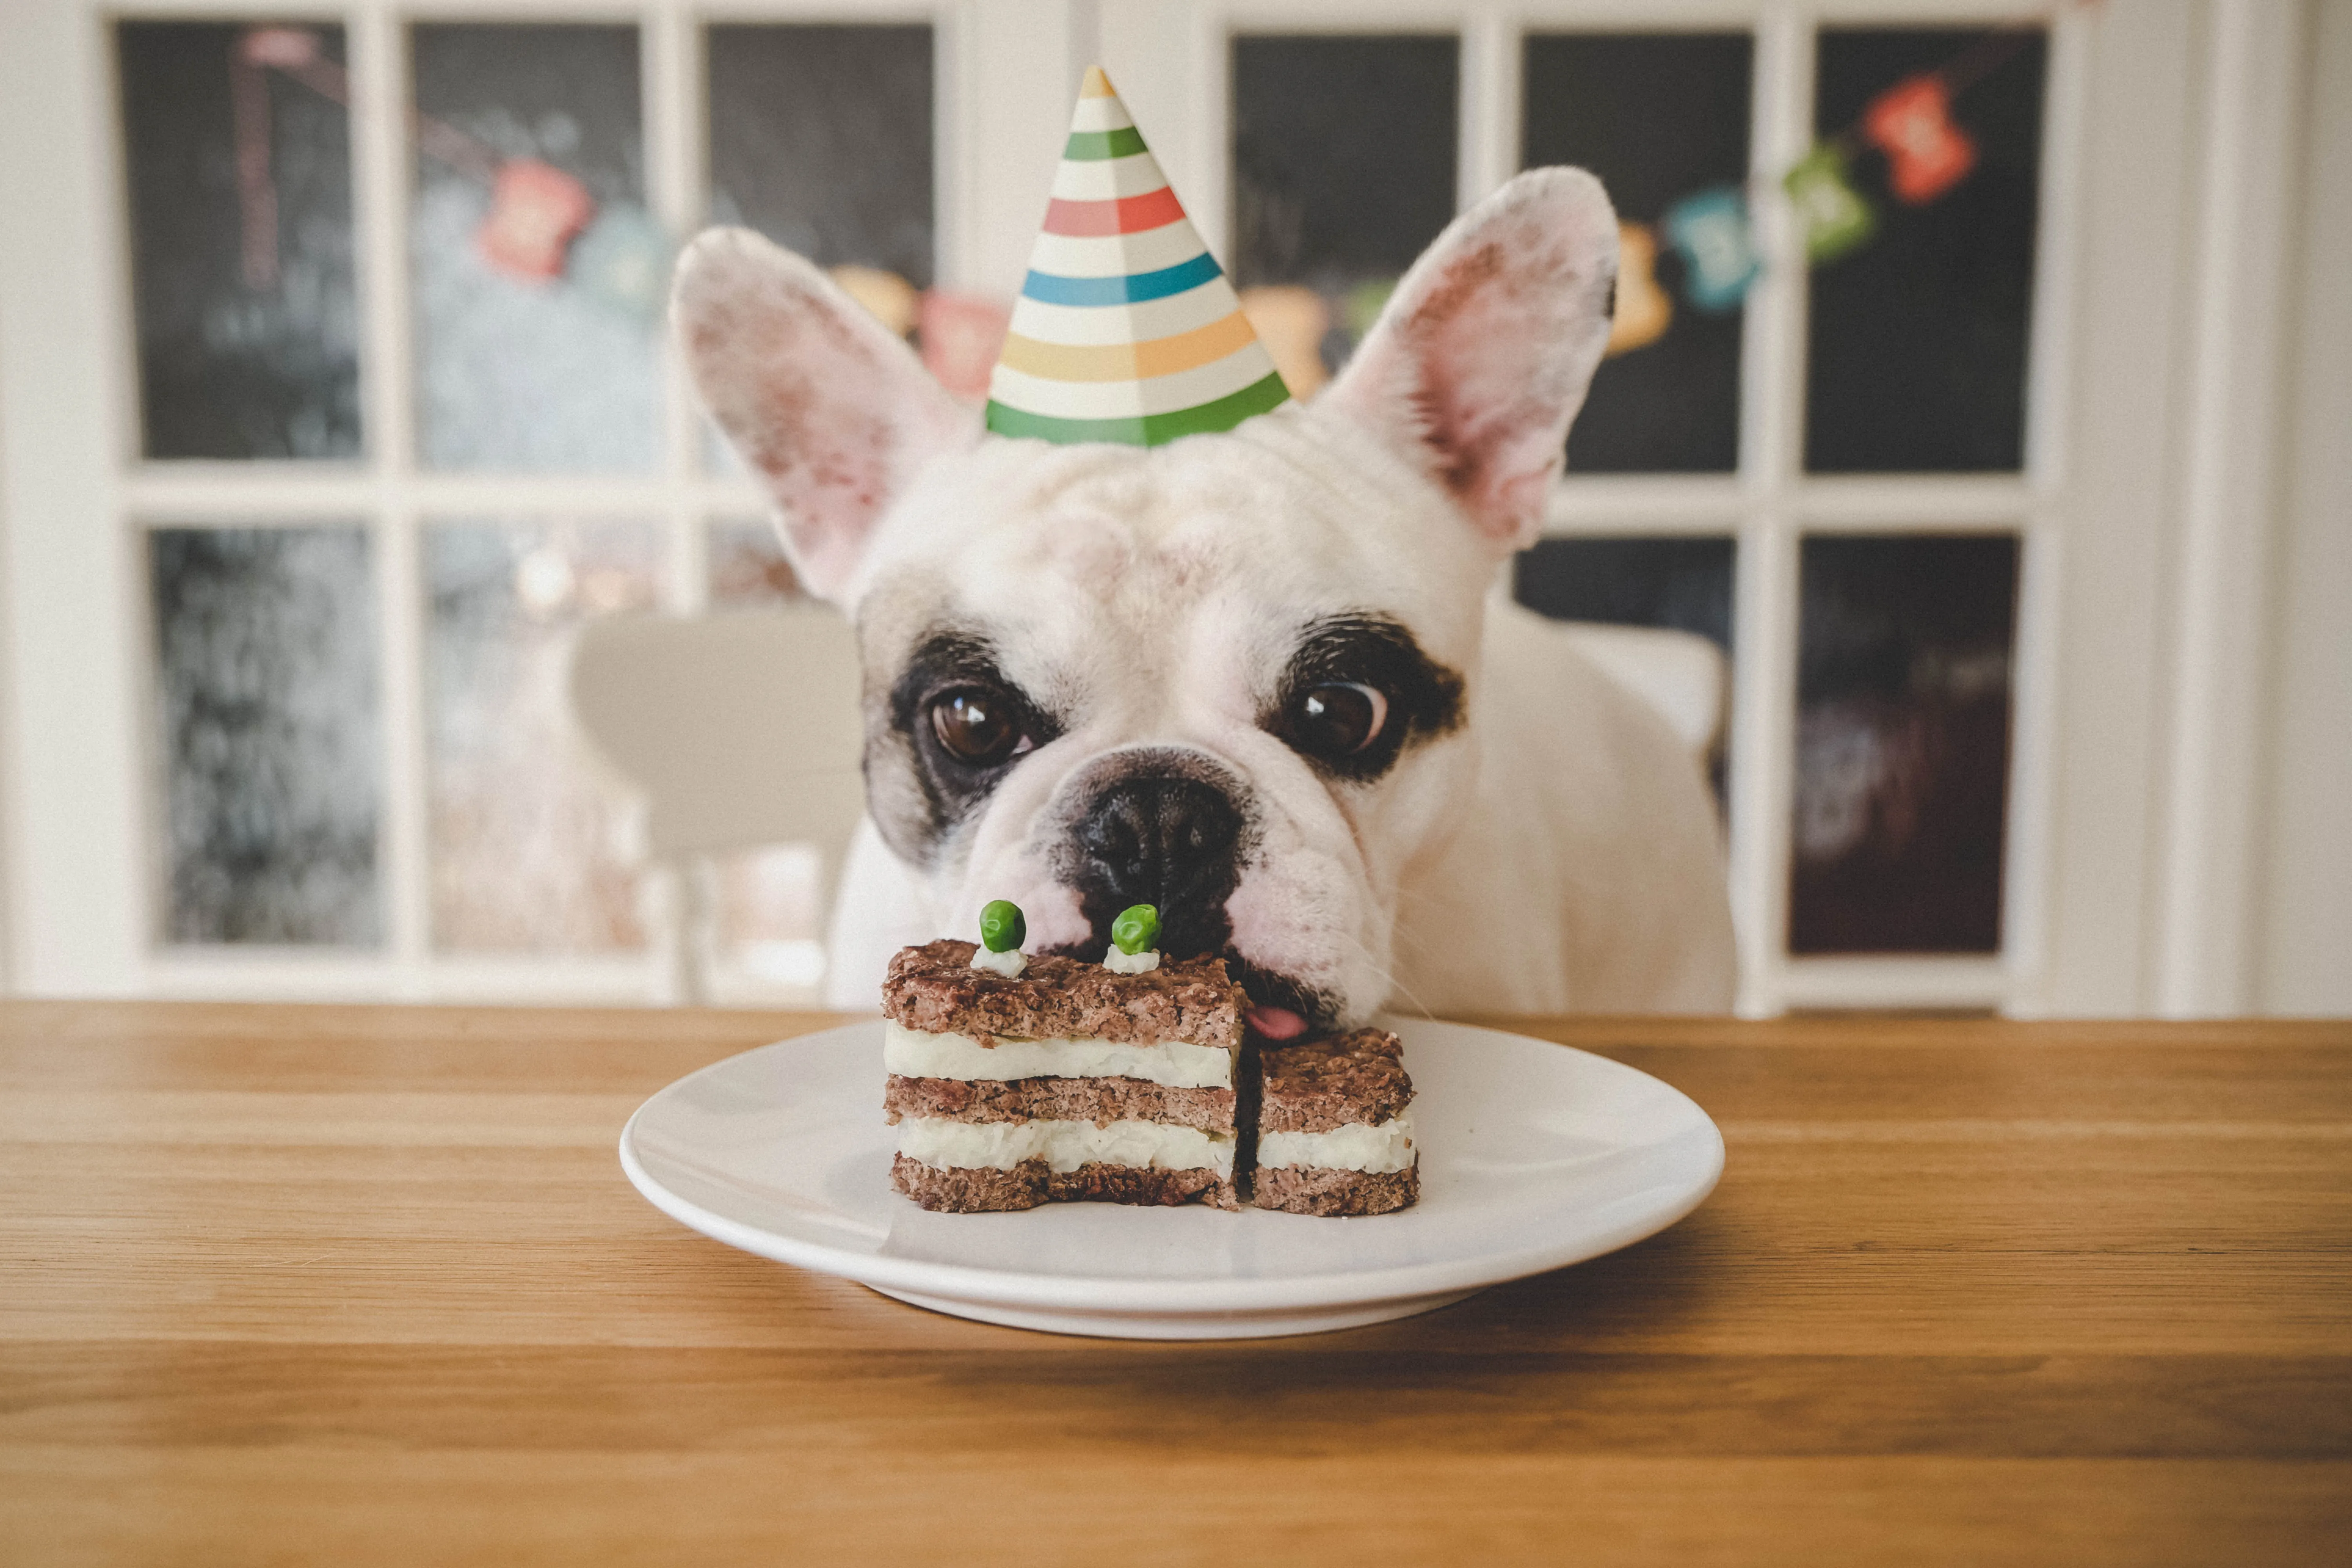 I think today you should organize a sur-paws party for your little friend! Get that tail wagging with treats leading to a muddy puddle and a birthday crown!